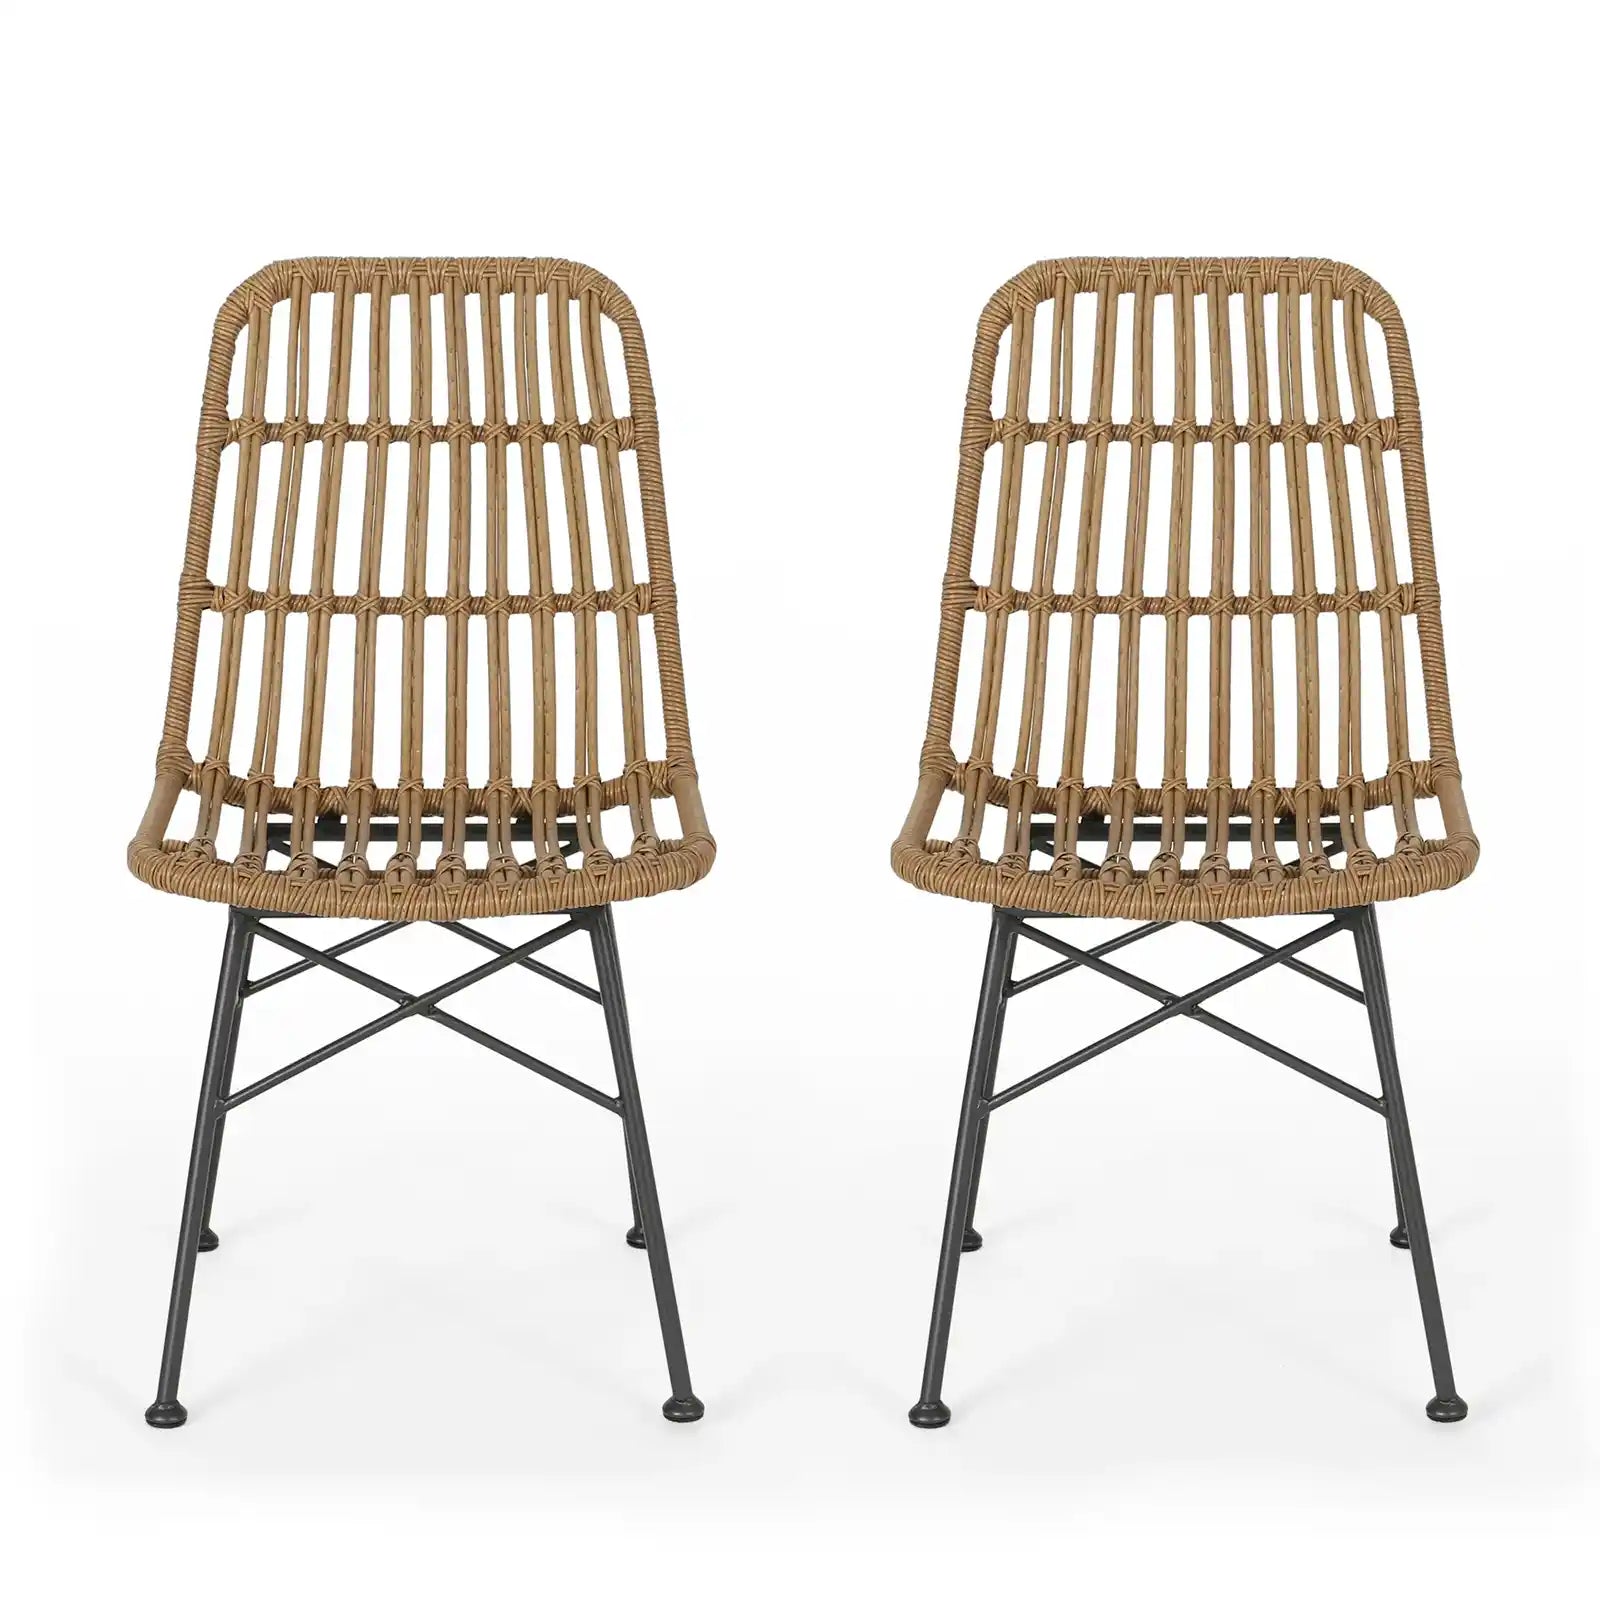 Outdoor Dining Chair - Metal - Set of 2 - Light Brown and Black